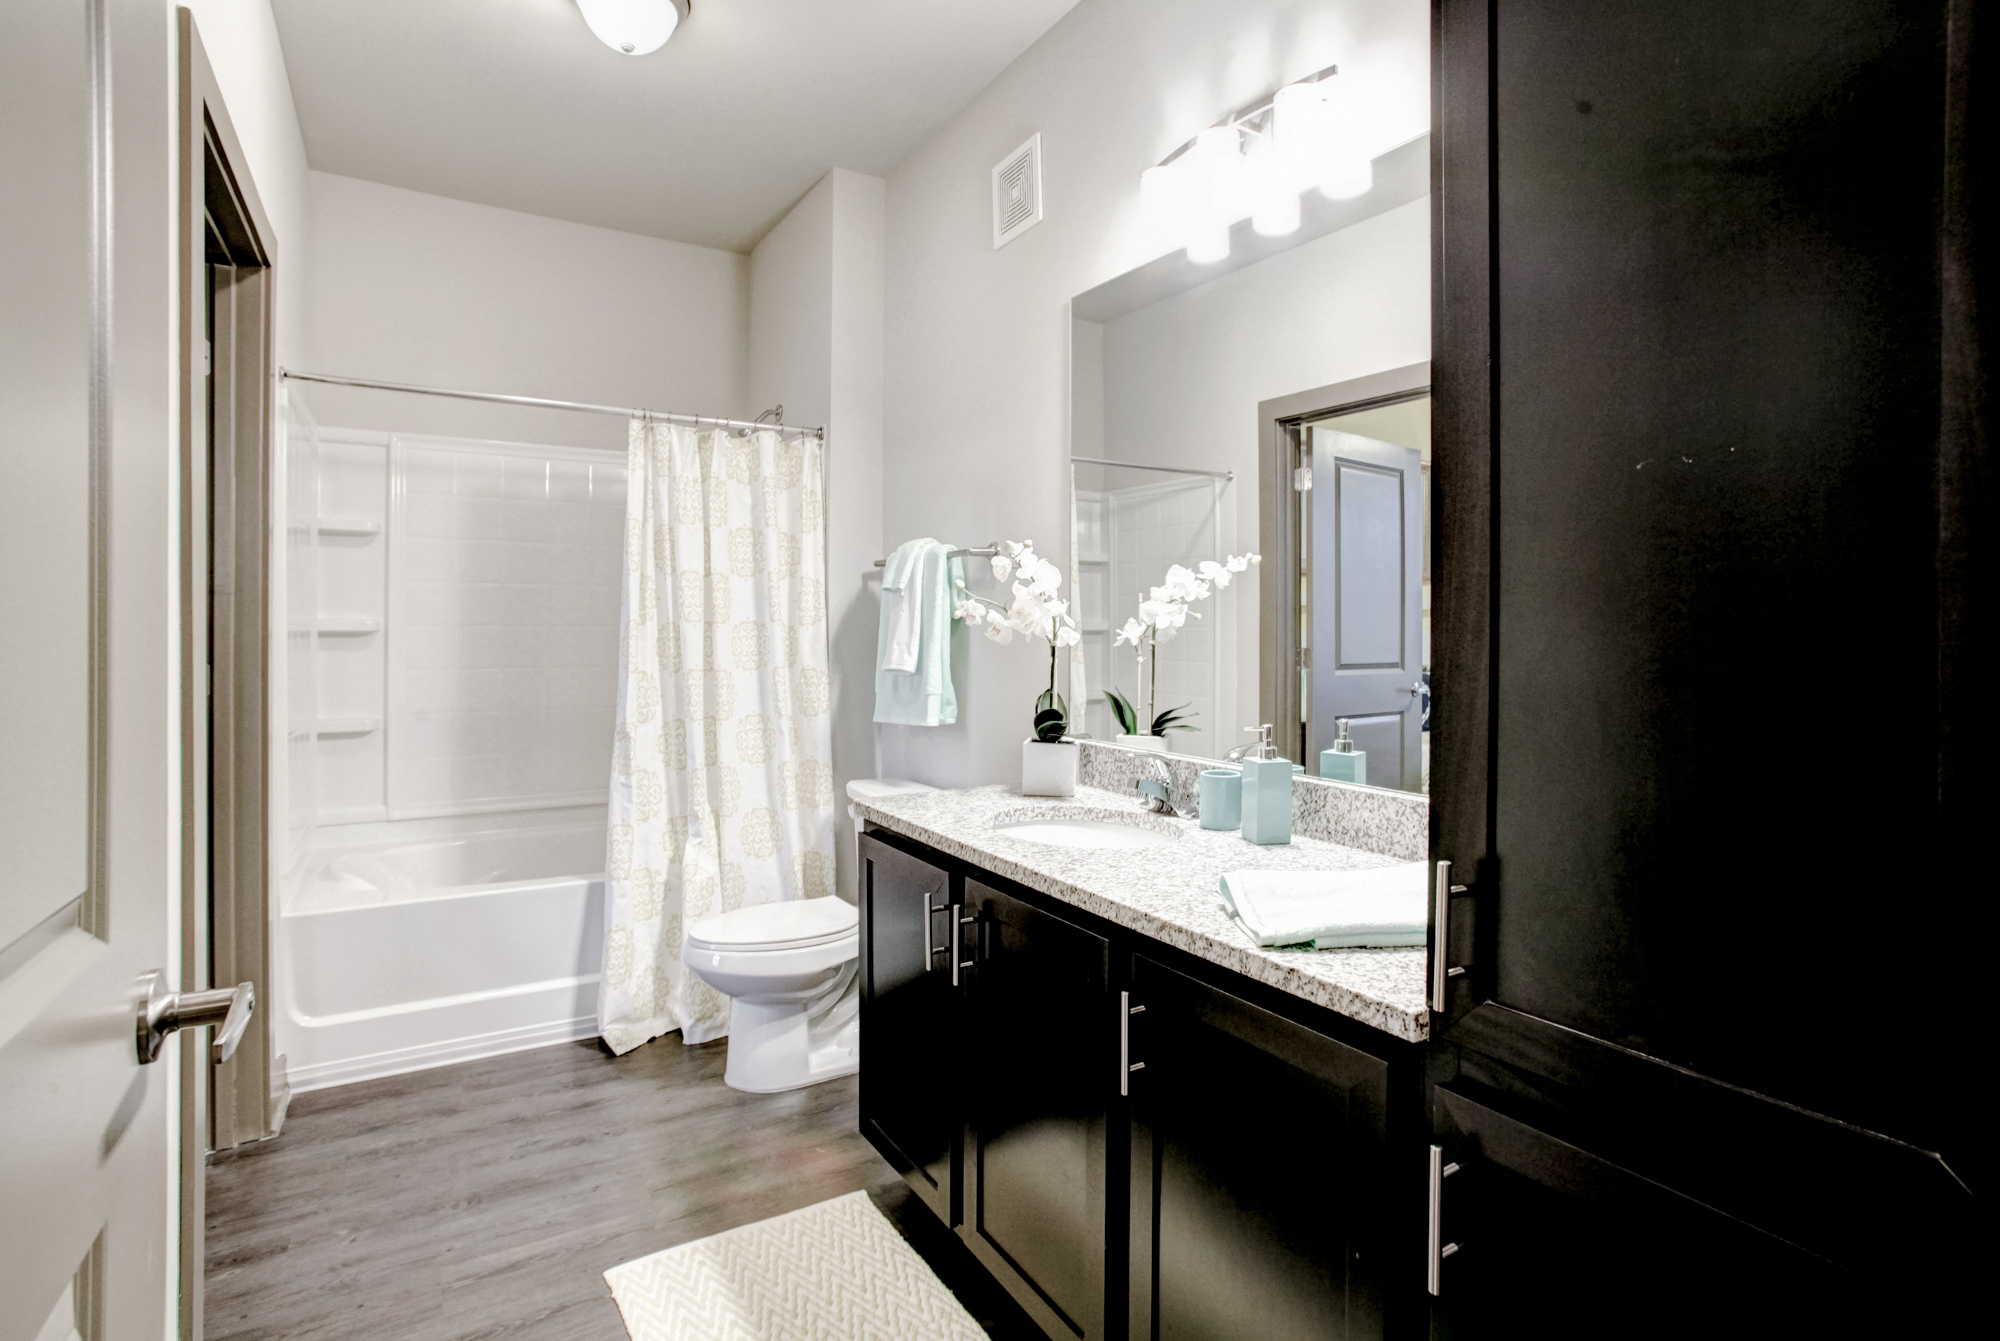 Bright, white features are complimented by dark cabinetry in the bathrooms at Park 9.